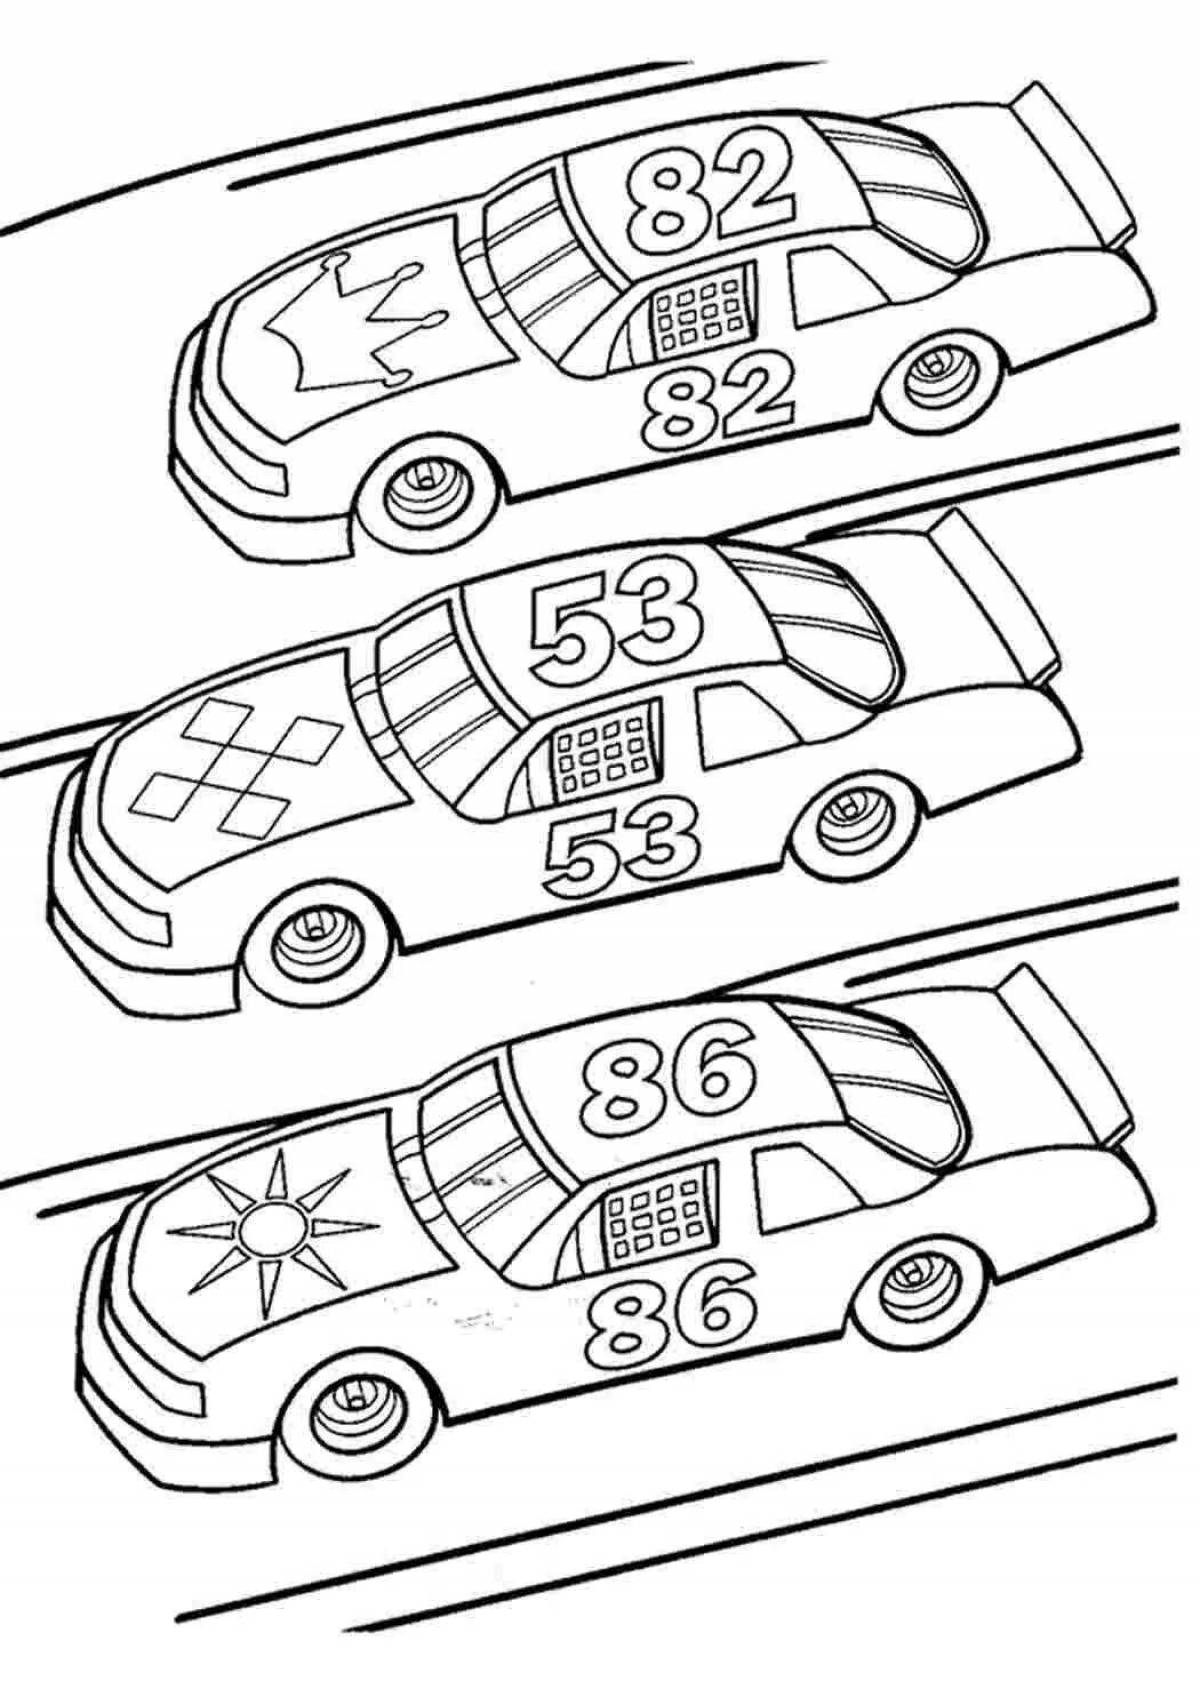 Amazing Racing 2 coloring page